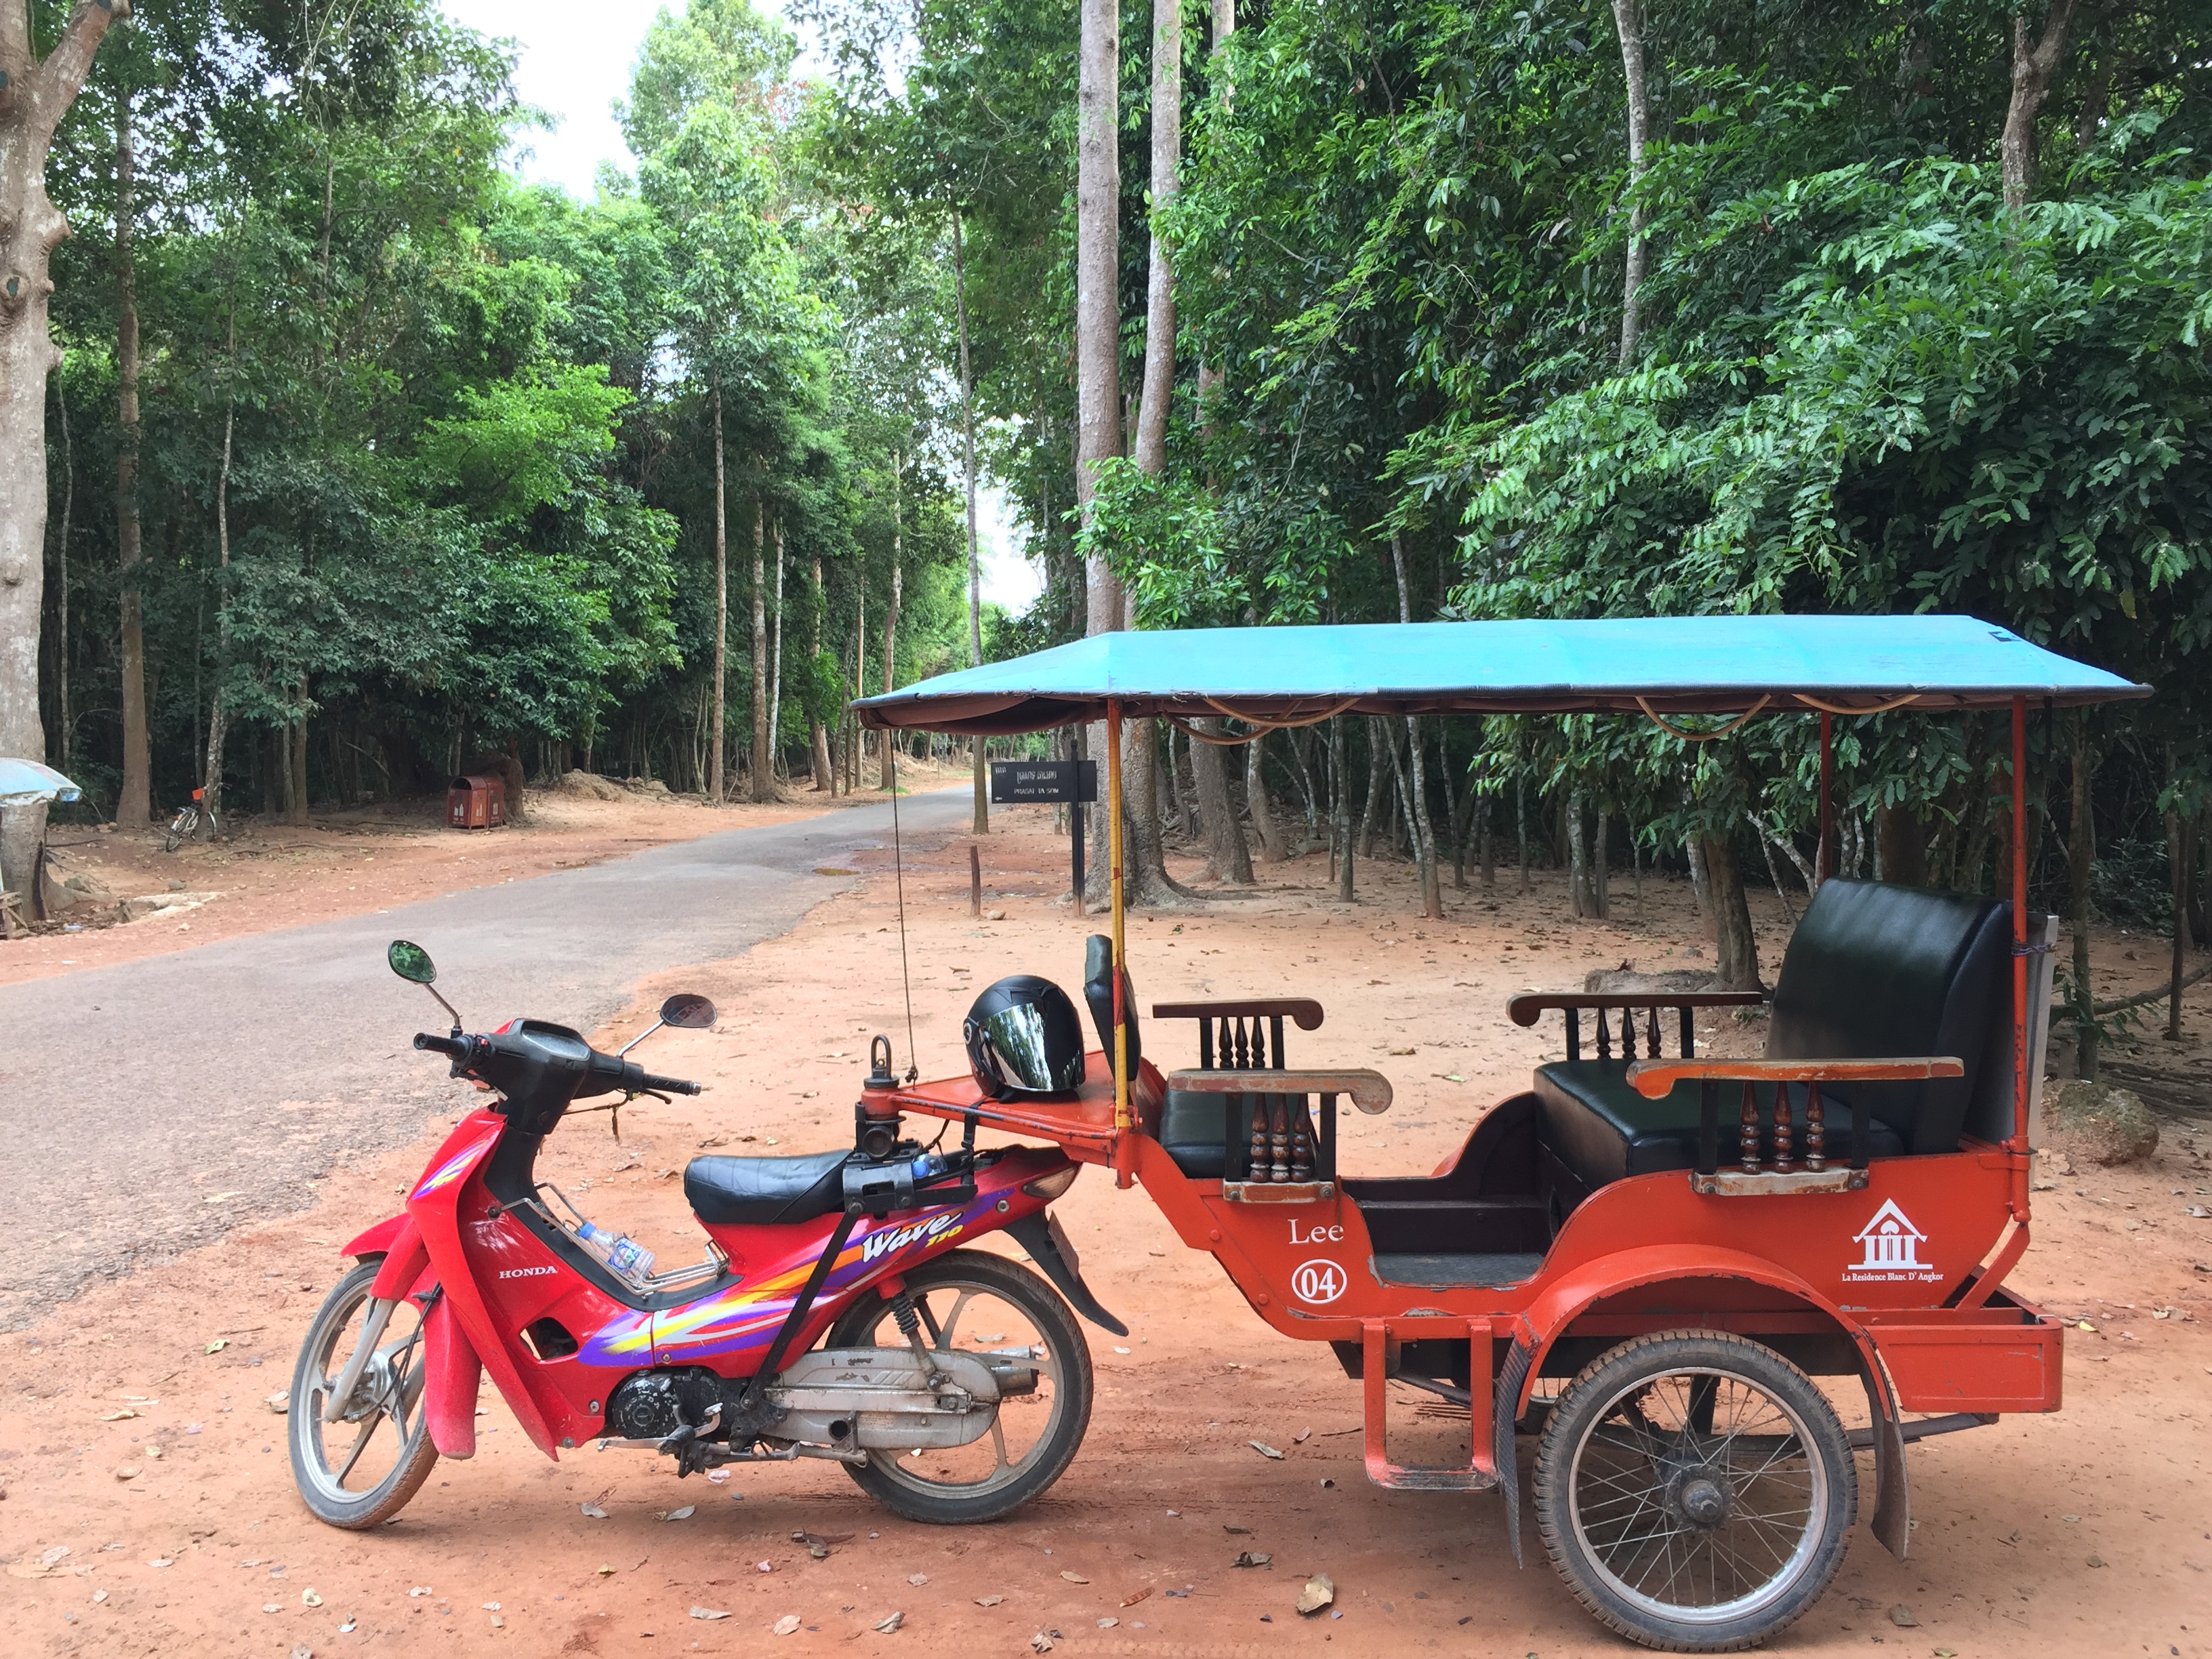 Why you need best Tuk-Tuk driver tour in Siem Reap? best lowest price, best service Guarantee. Best driver with good Speaking English, I have been a tuk tuk driver for many years in Angkor Archaeological Park and other tourism sites around Angkor. I know the most interesting and beautiful places in the greater Siem Reap area. I will help you find the best spots for taking memorable photos. I always offer our best service on your trip of a lifetime. I work honestly and punctually at all times. My services have been prepared with the needs of all travelers in mind. Please try My service - I guarantee that you will see the real Cambodia. I would like to hear from you with any suggestions or recommendations. I am available to attend to your sightseeing and activity requirements. Please feel free contact us here for more informations!